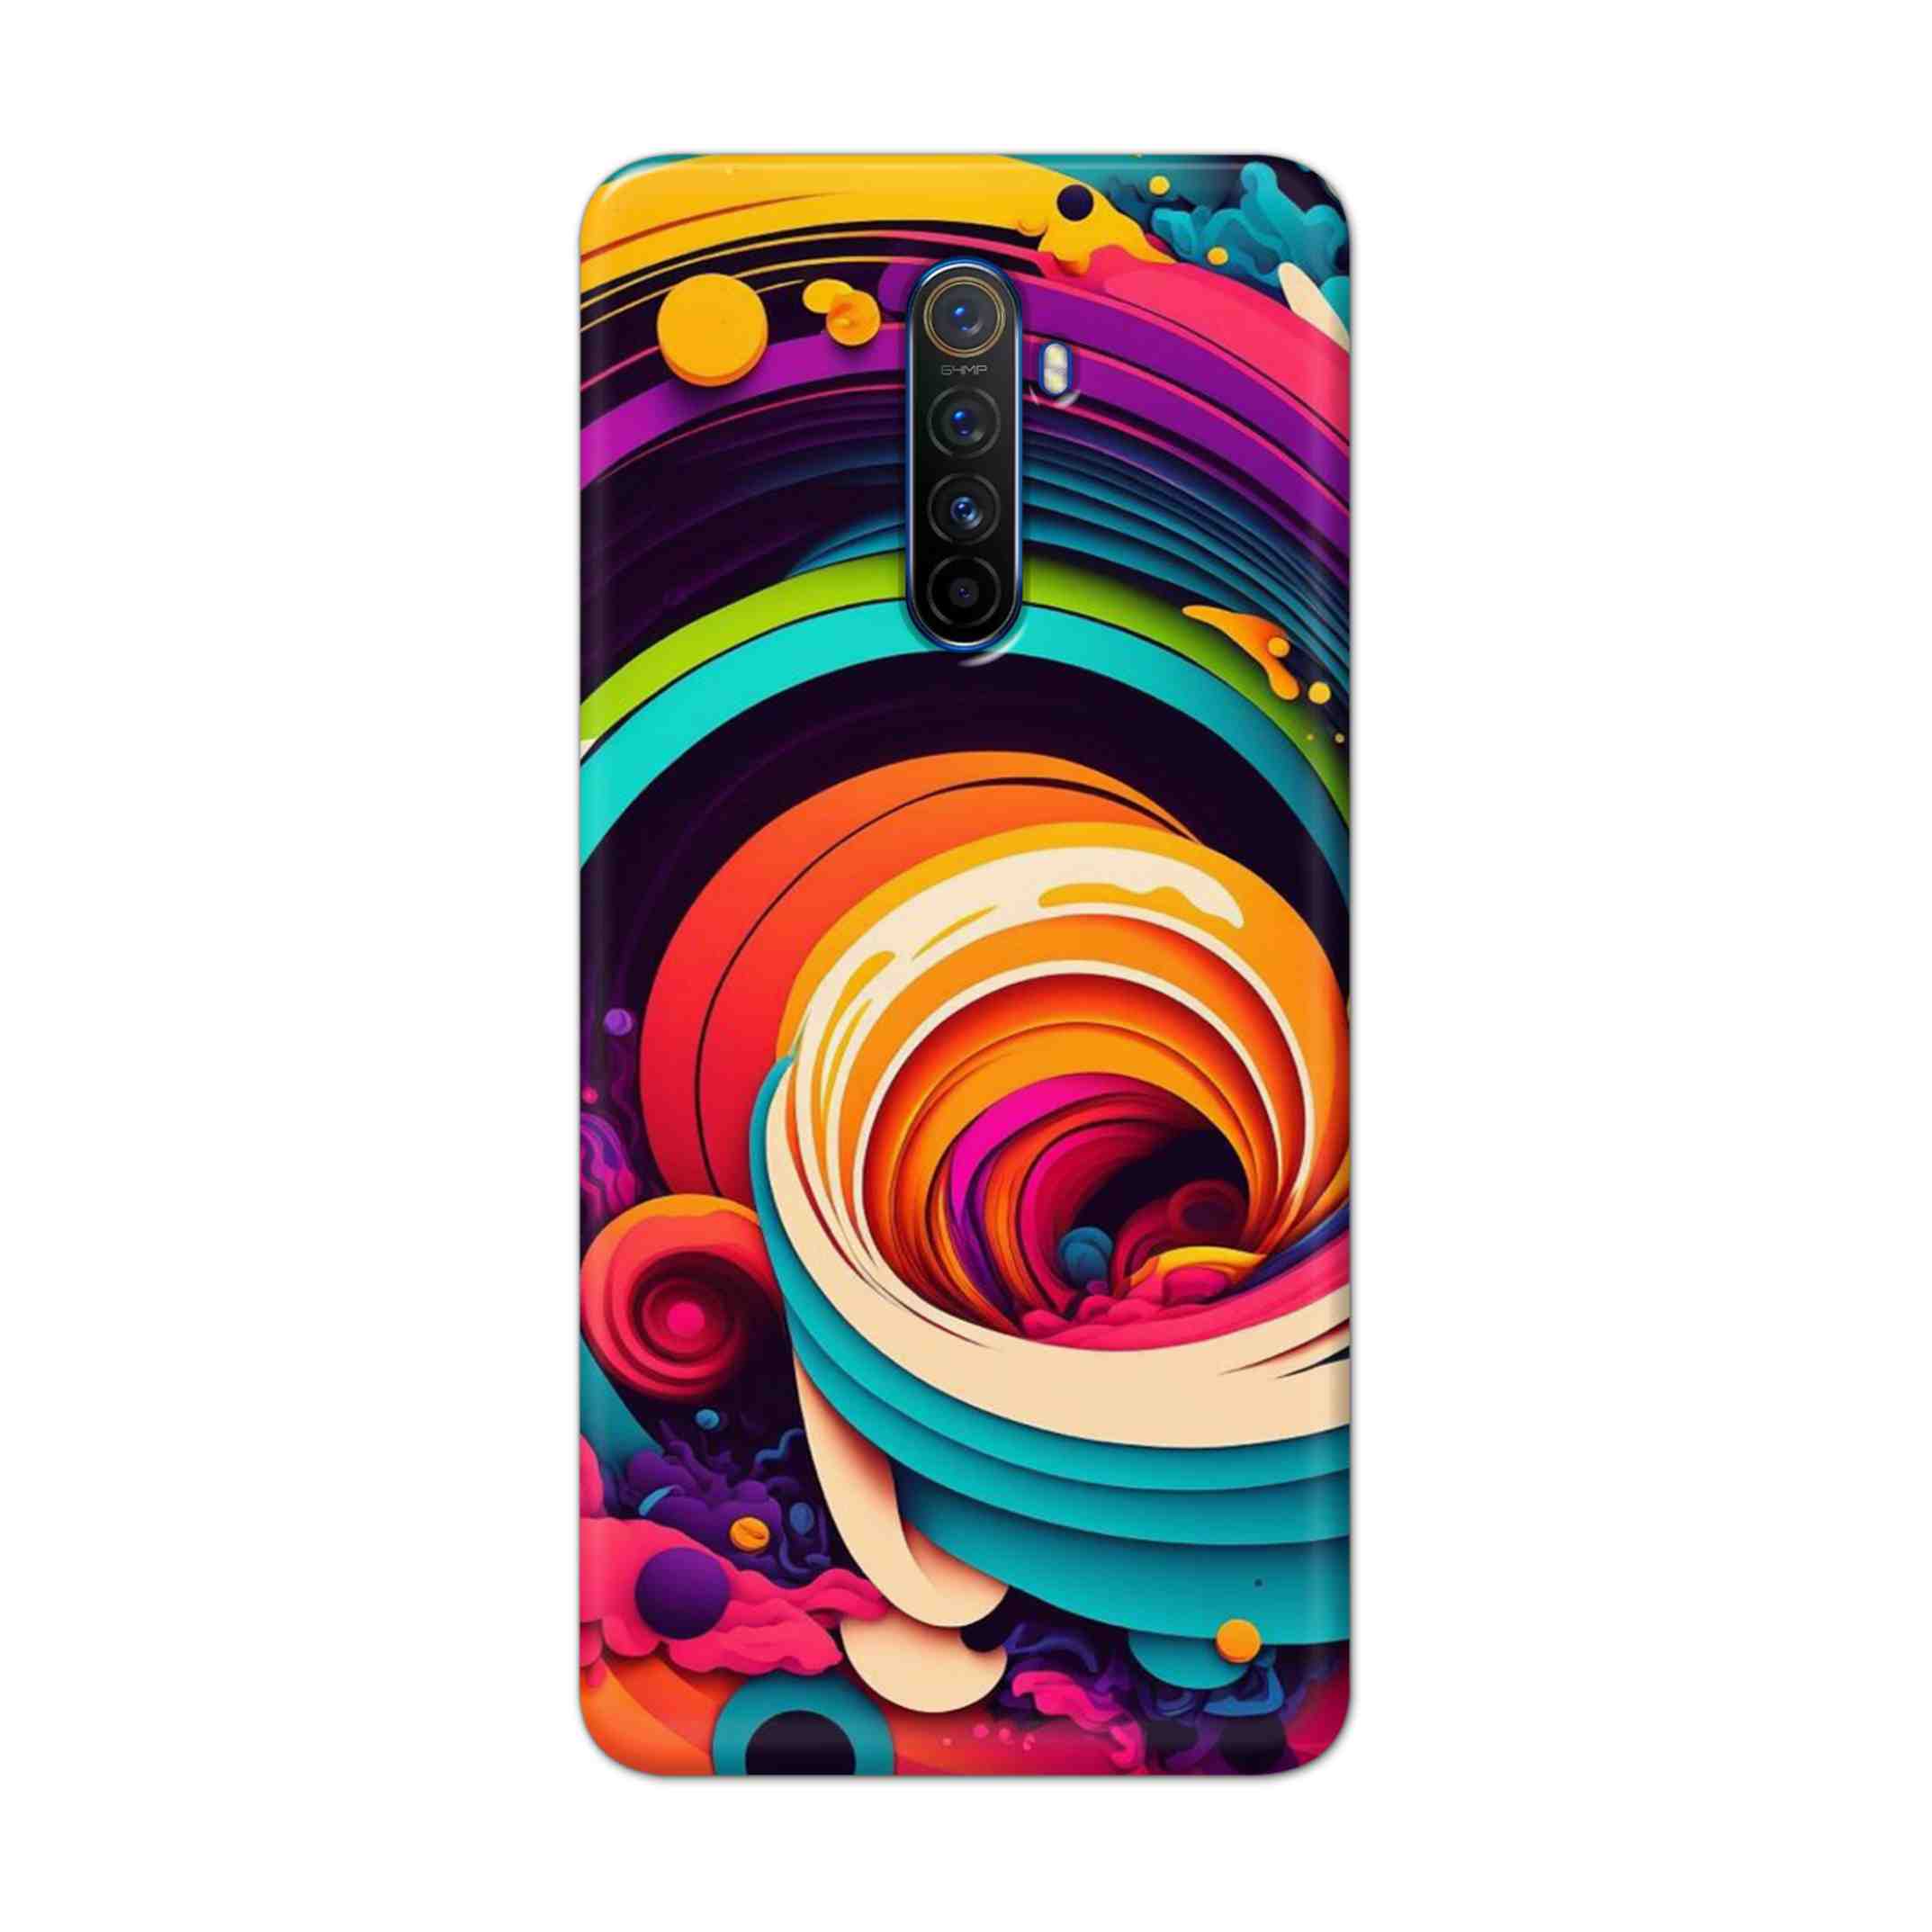 Buy Colour Circle Hard Back Mobile Phone Case Cover For Realme X2 Pro Online